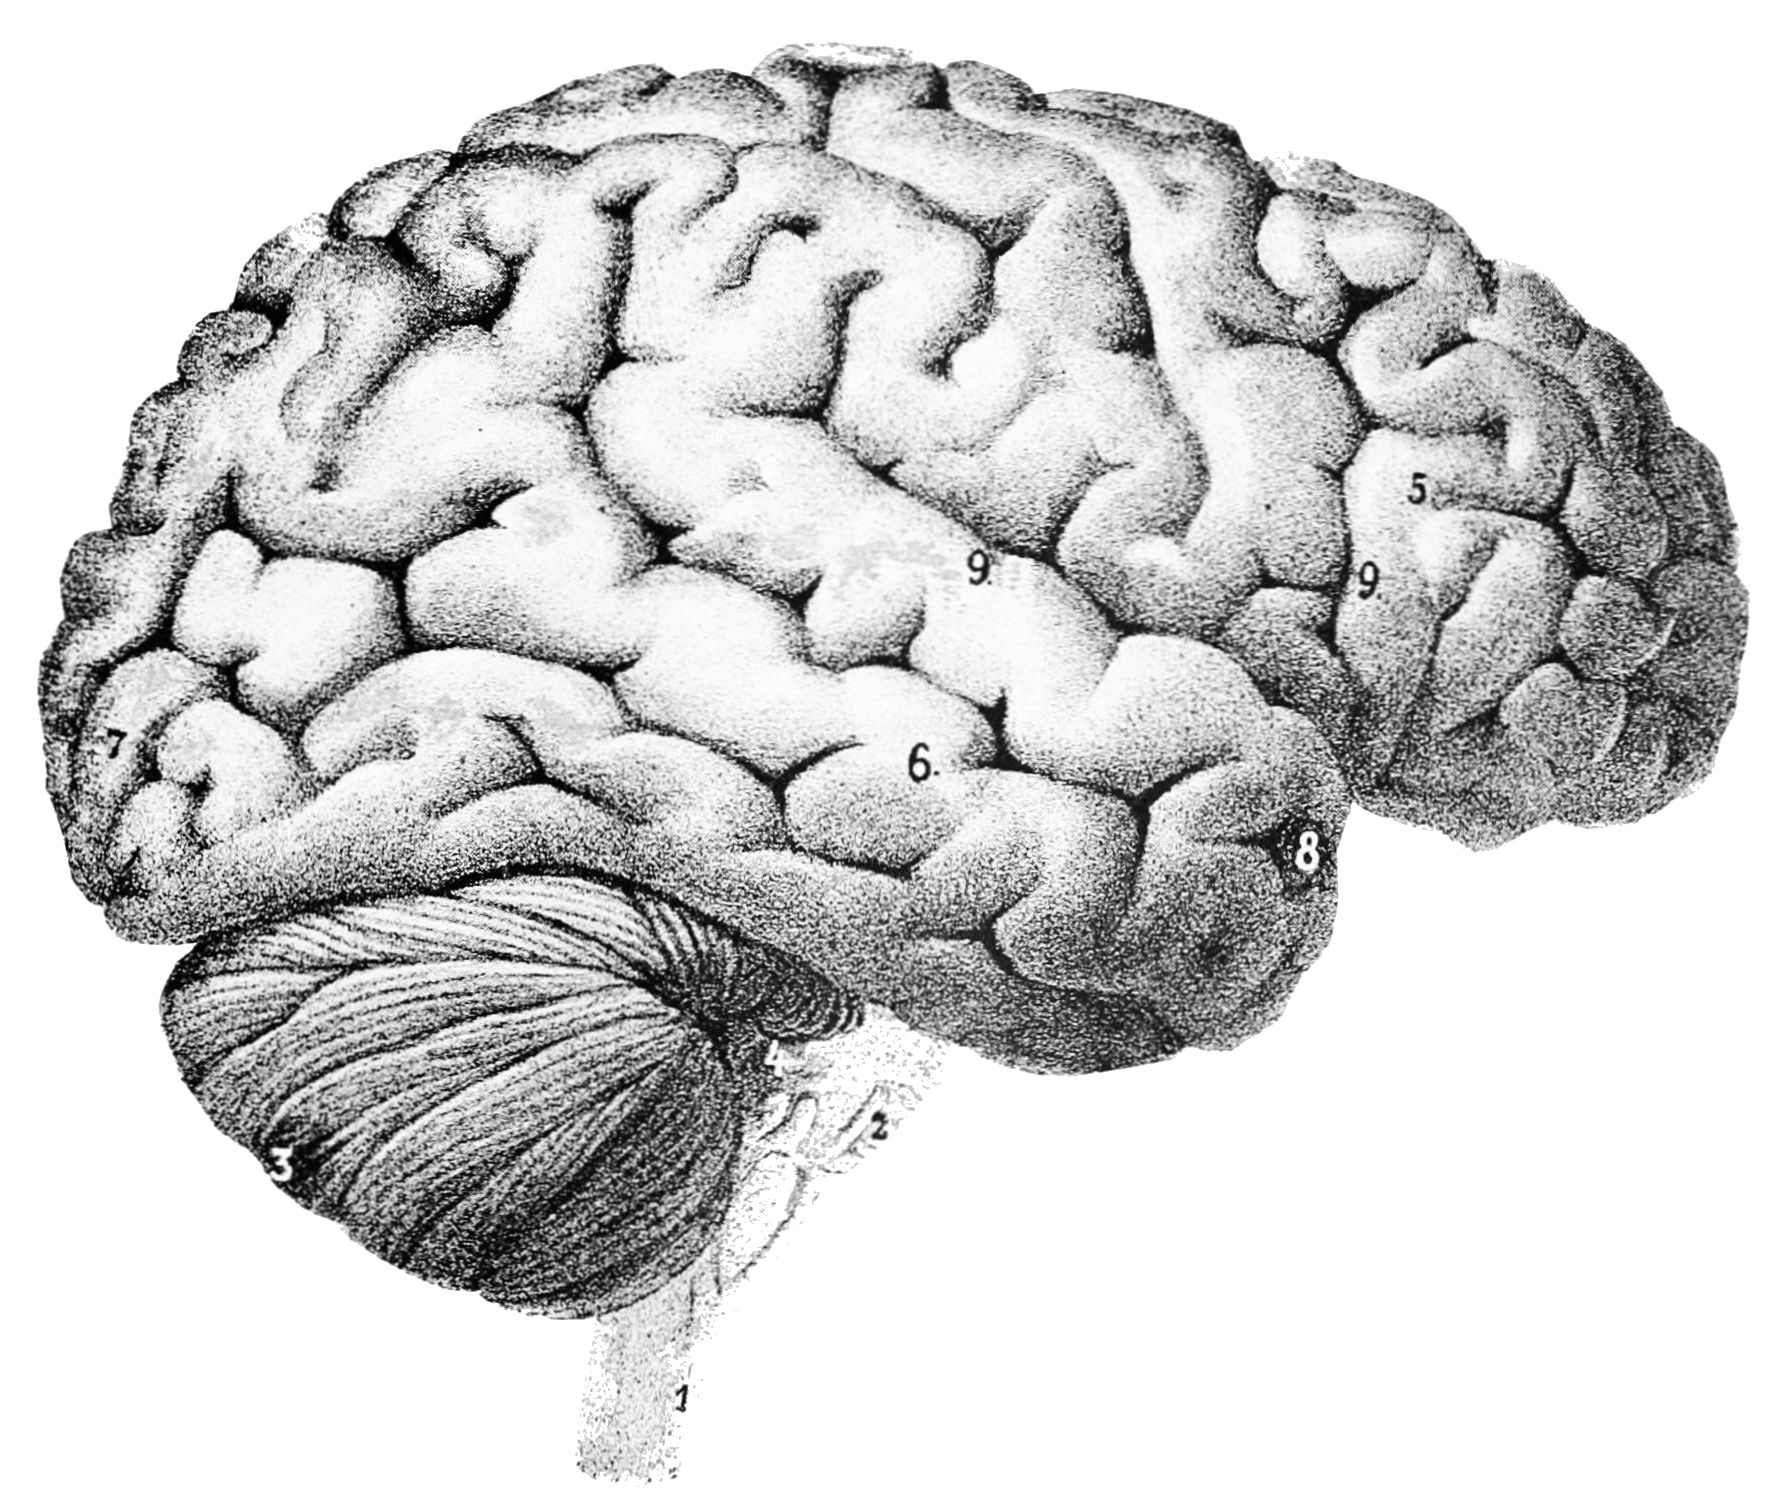 https://commons.wikimedia.org/wiki/File:PSM_V46_D167_Outer_surface_of_the_human_brain.jpg